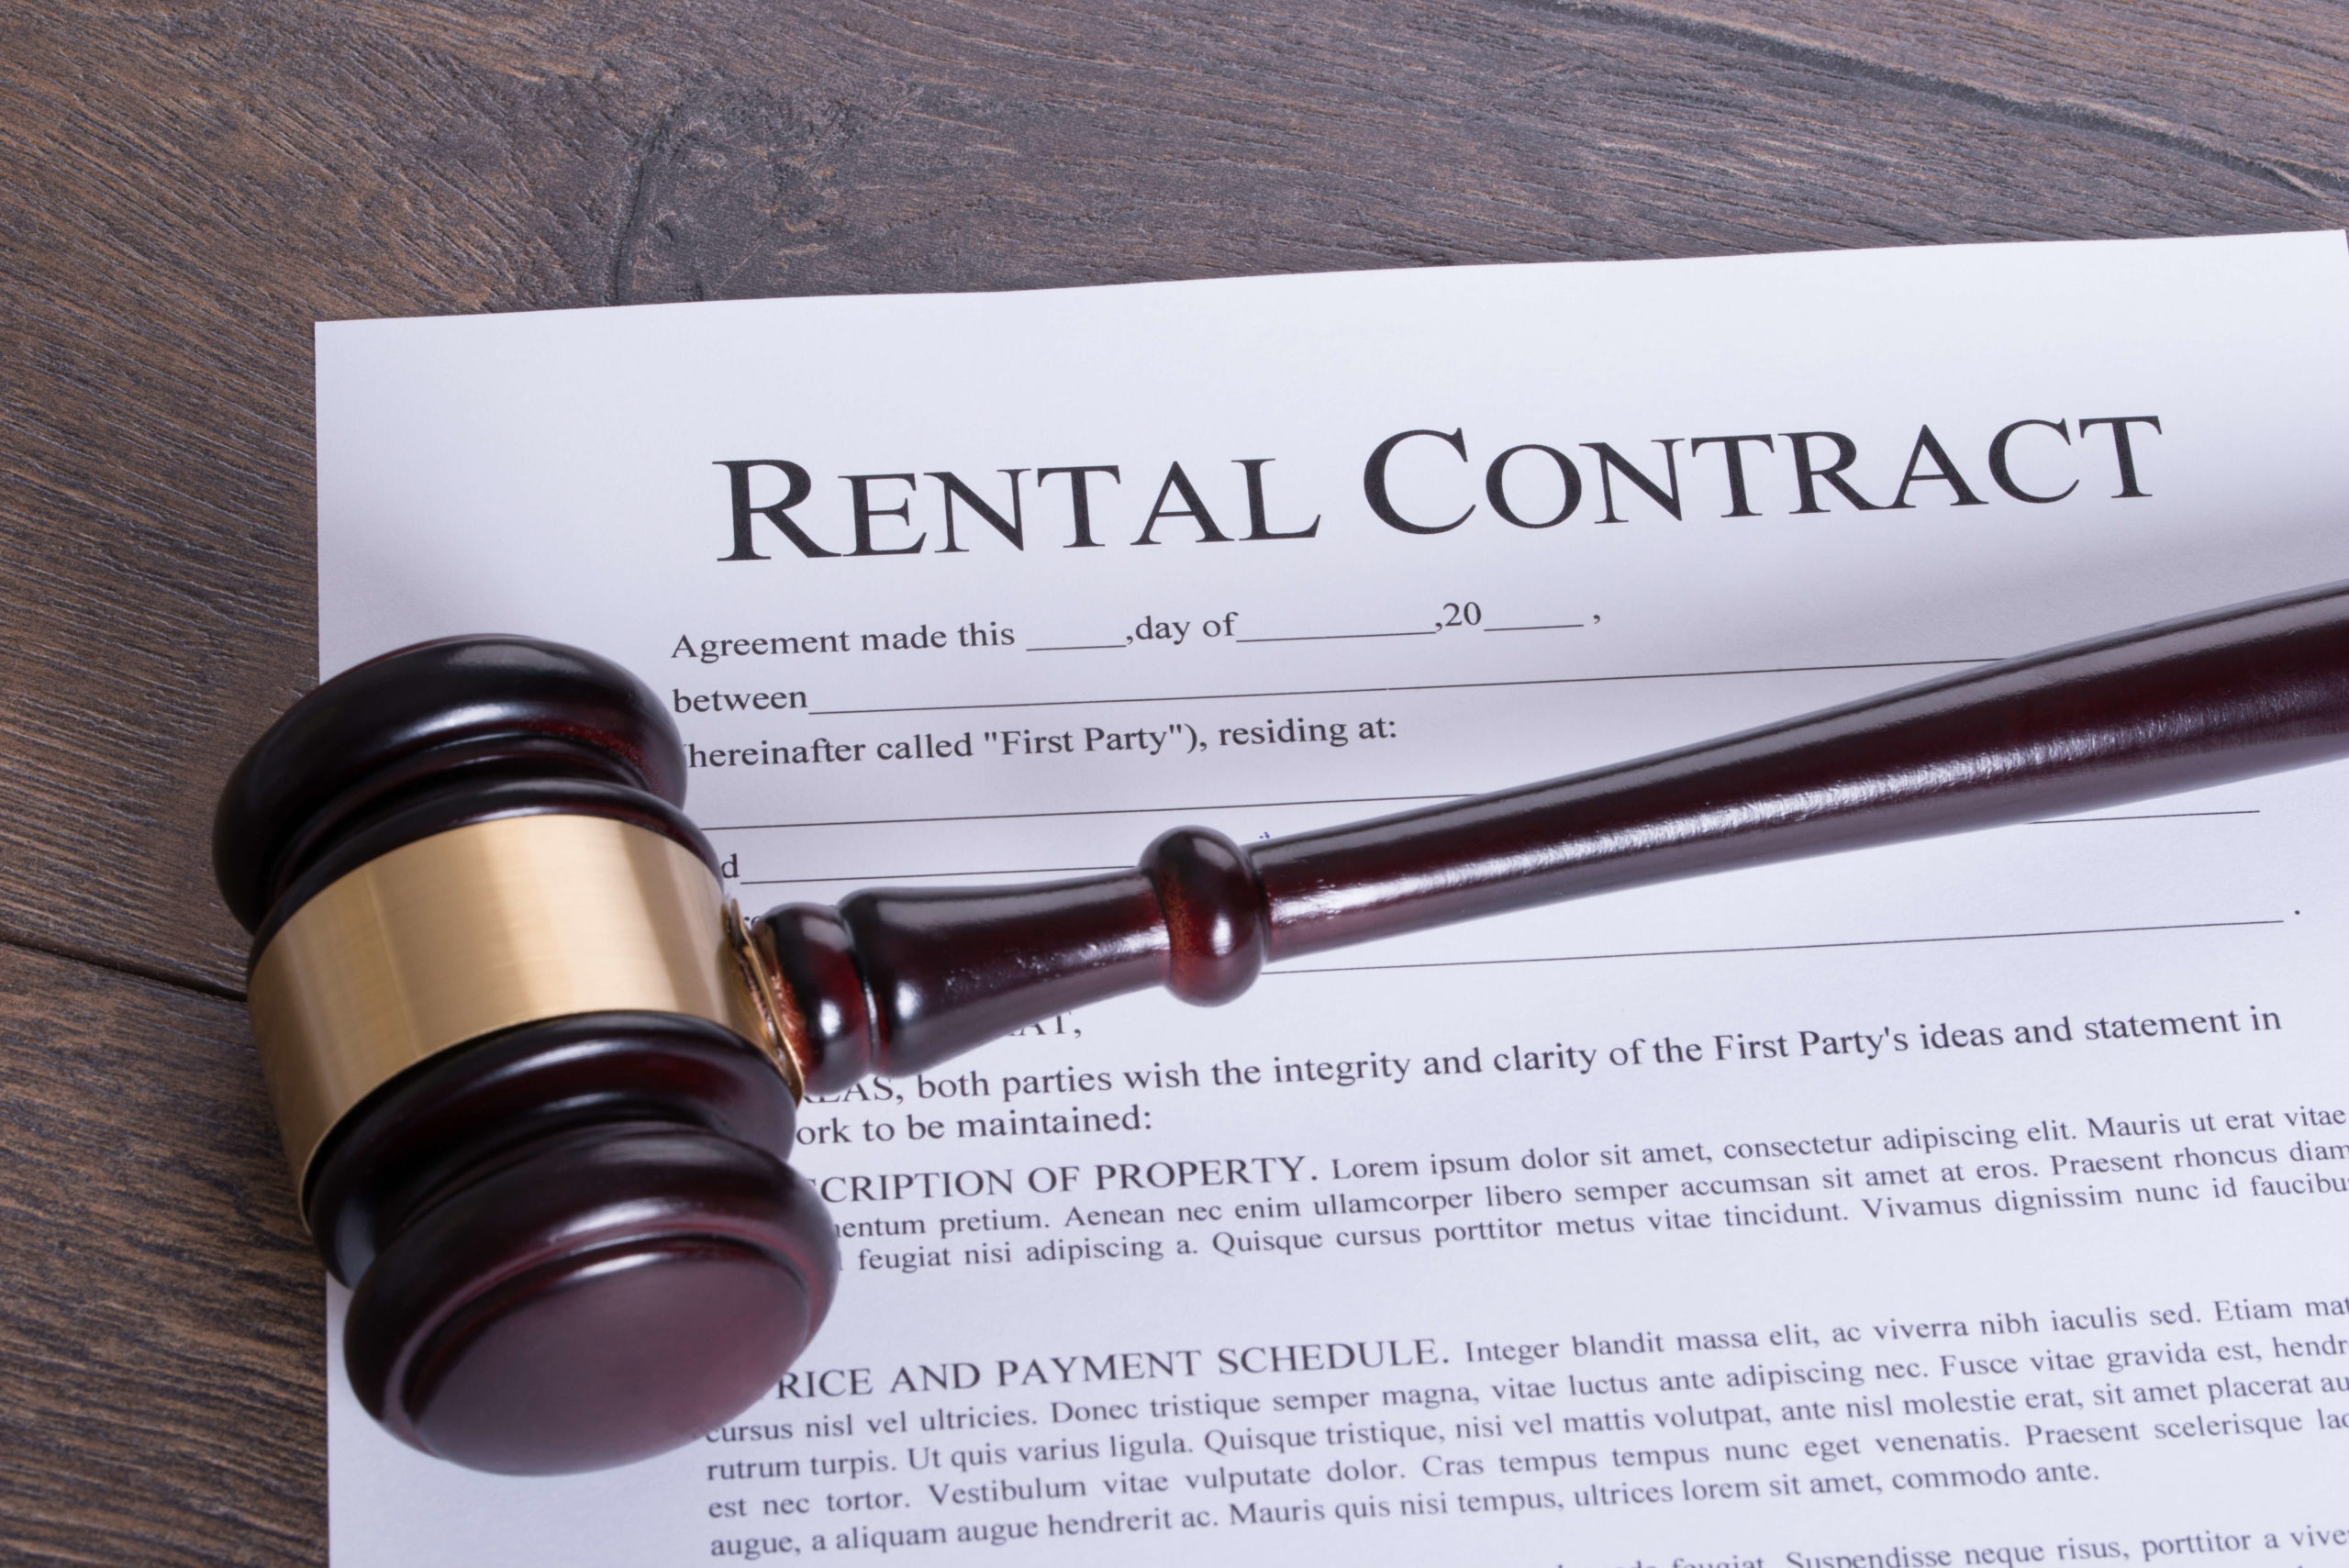 Tenant Rights What Are They?